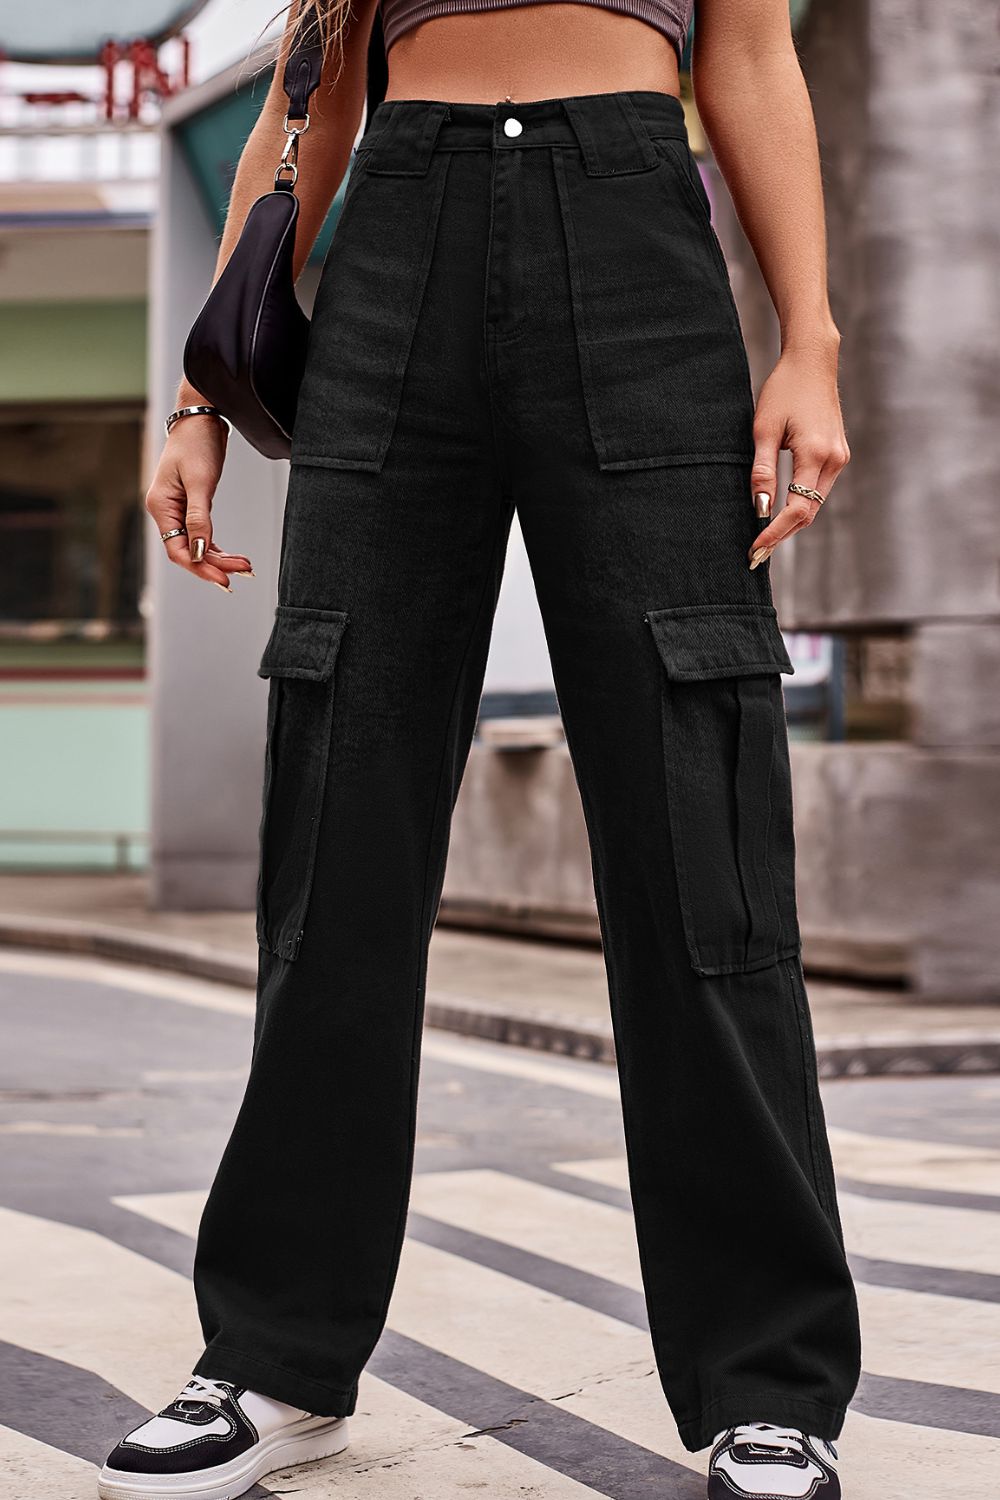 Buttoned High Waist Loose Fit Jeans Pants